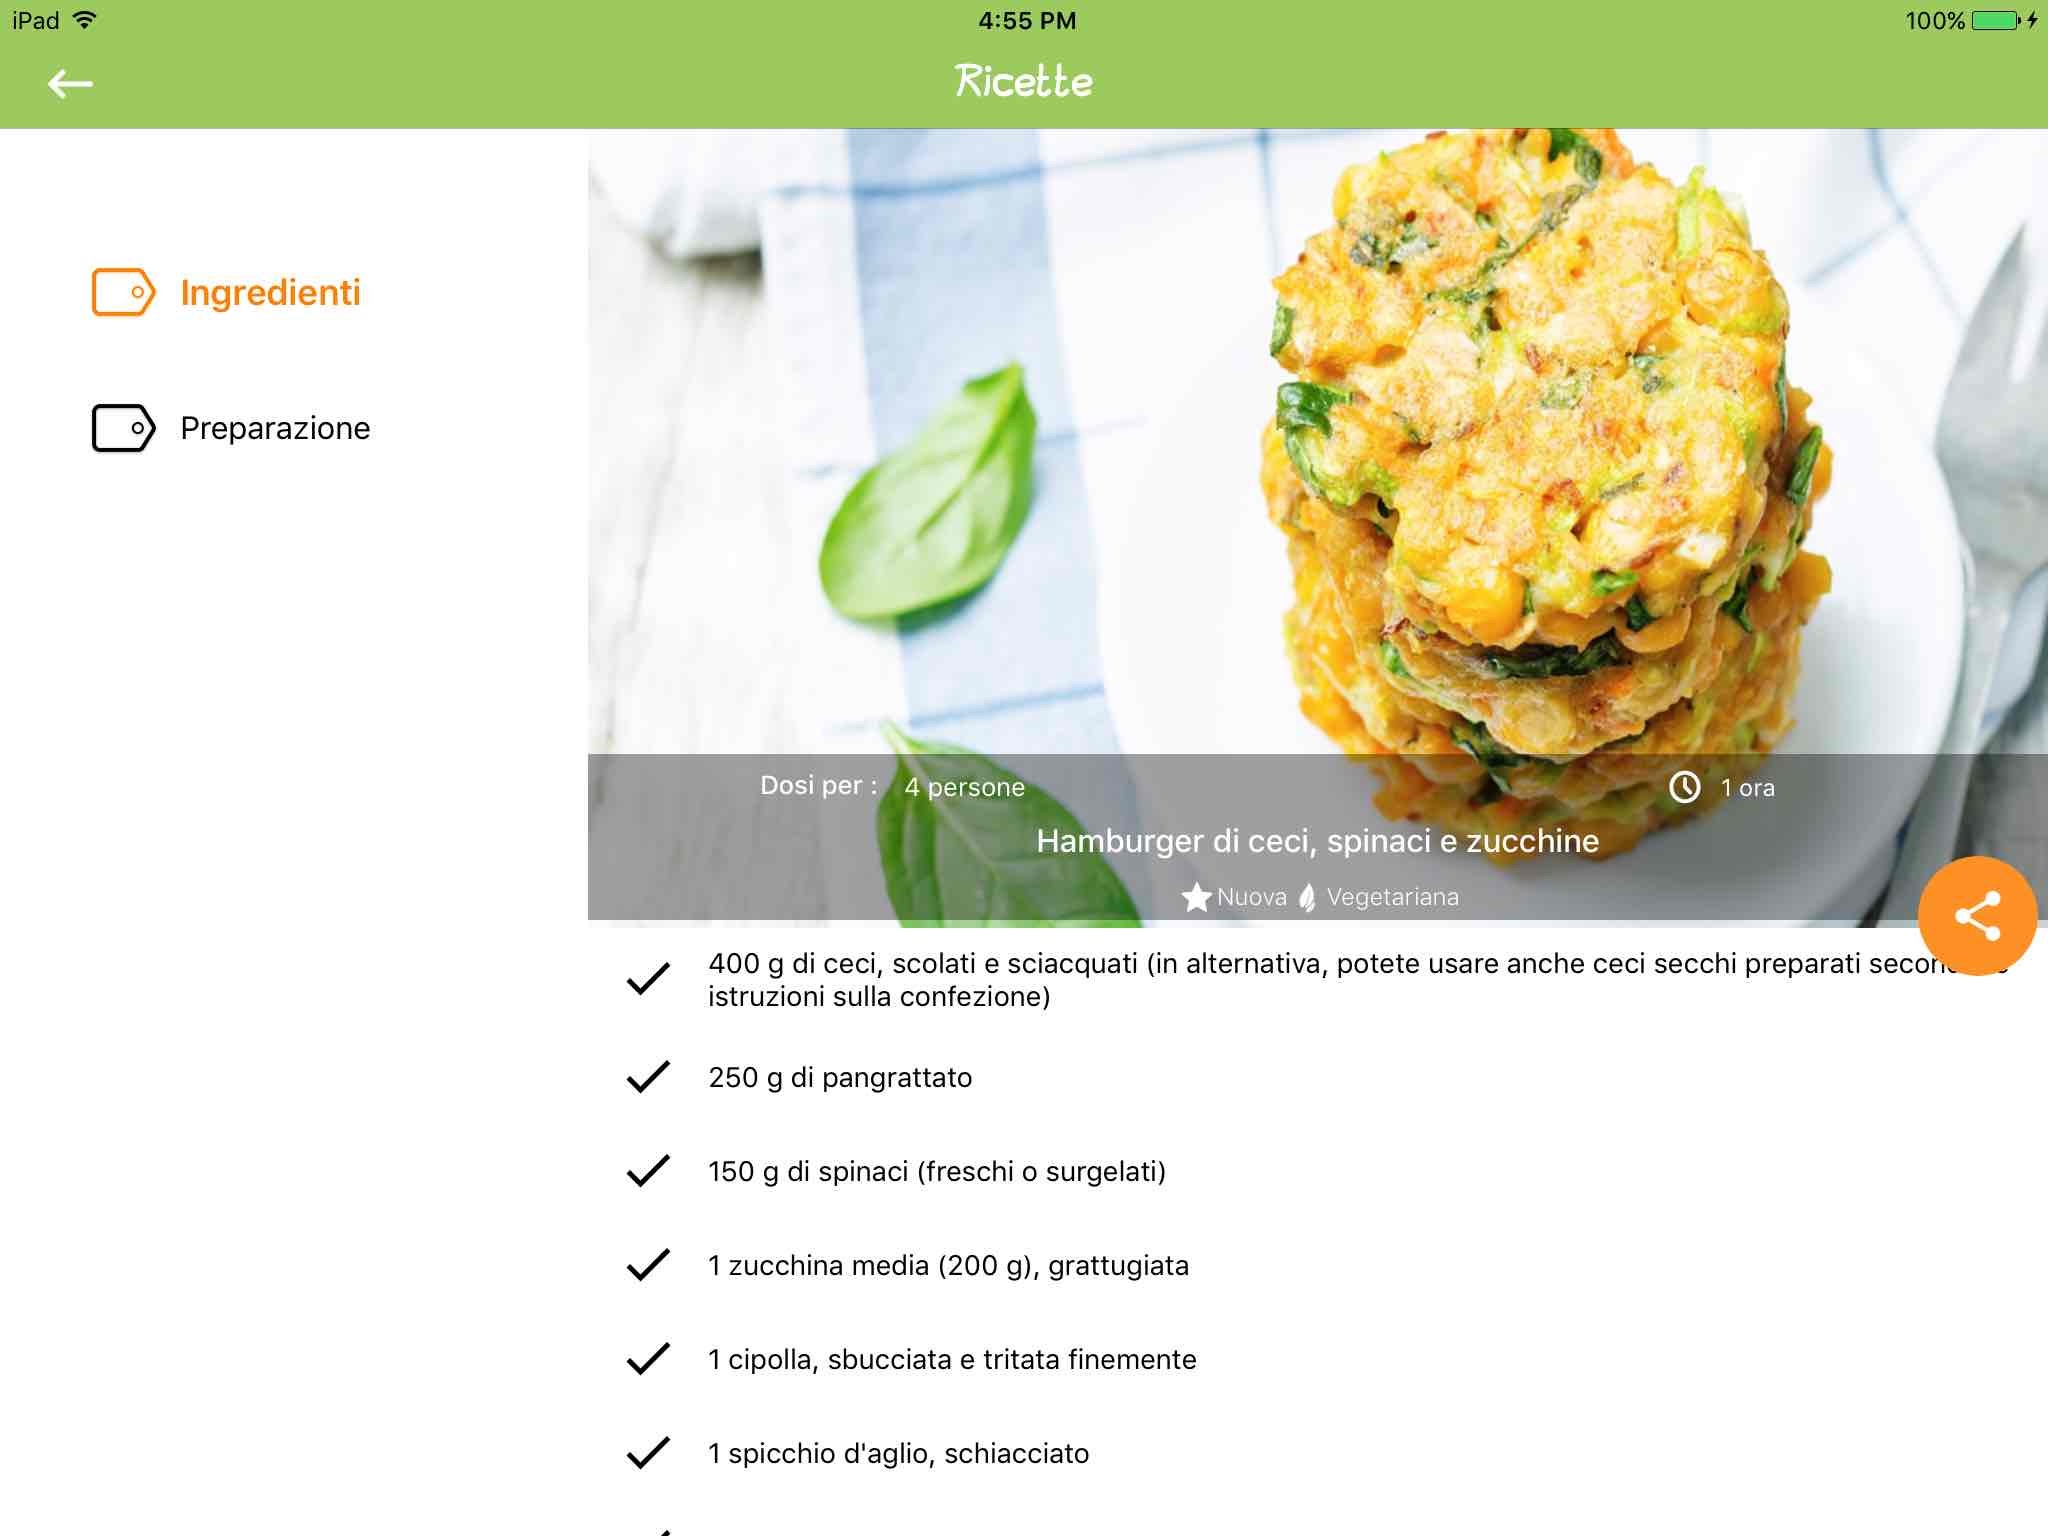 Baby Led Weaning Guide Recipes screenshot 4